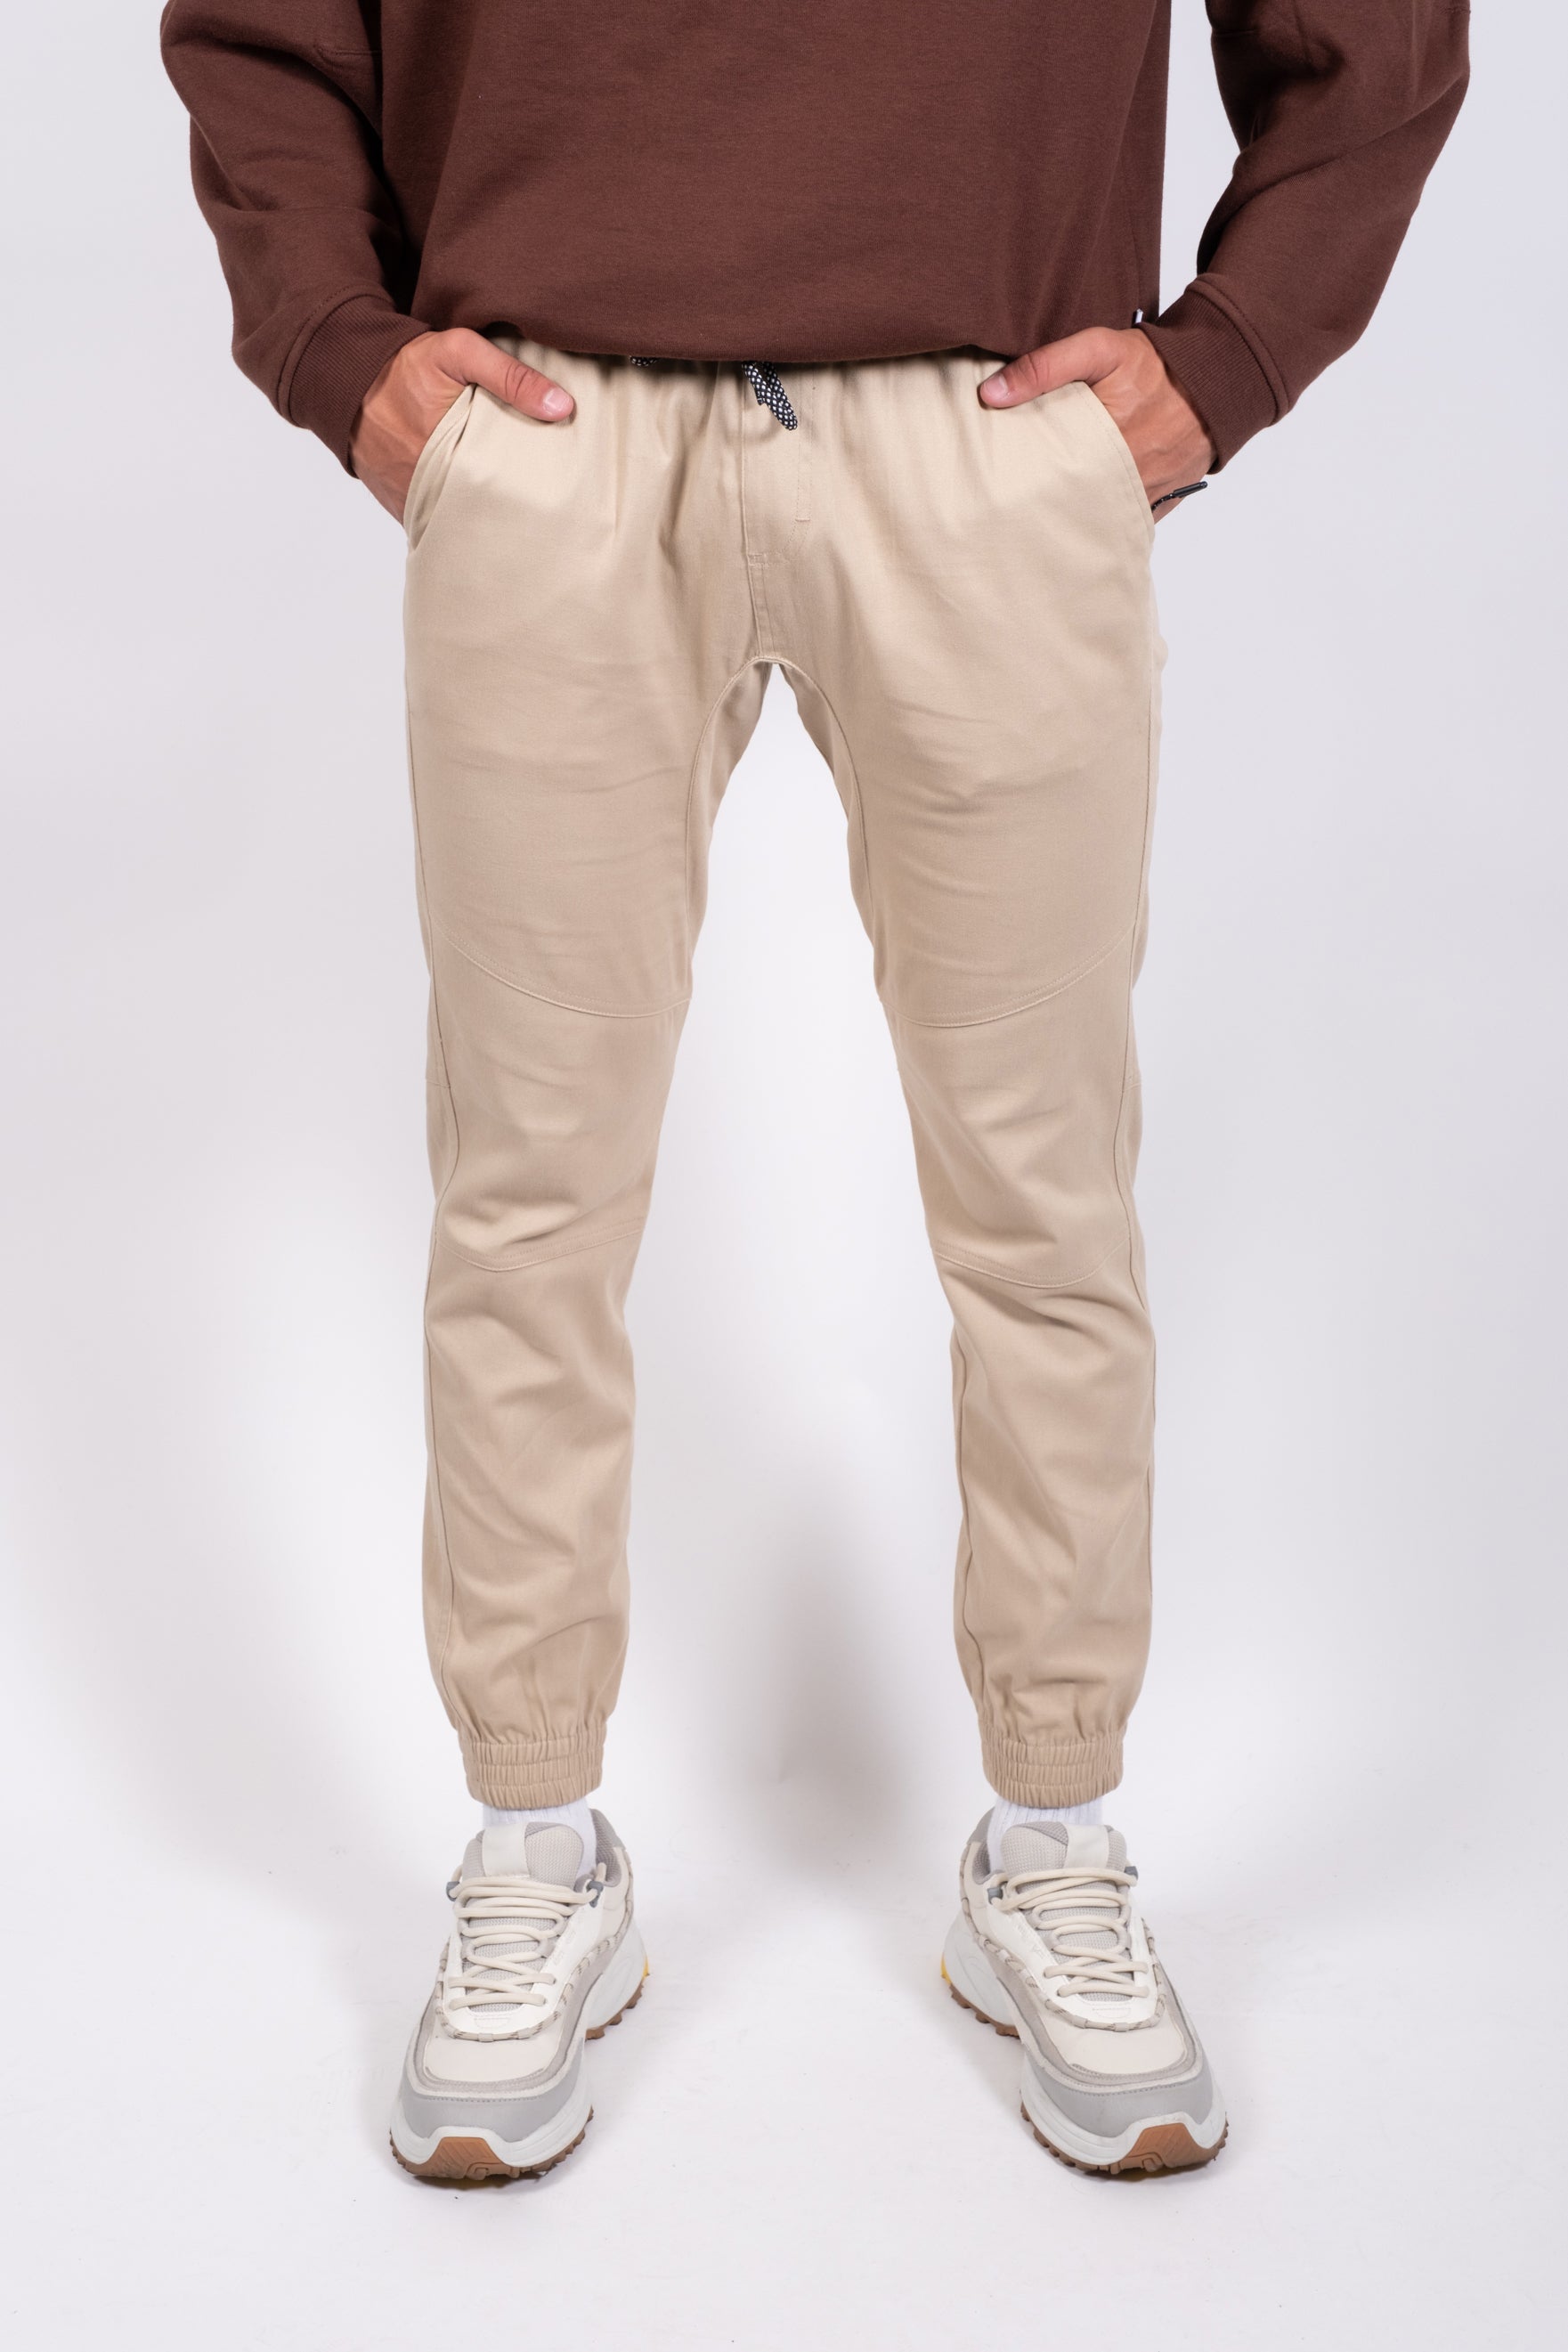 Buy Cargo Pocket Twill Jogger Men's Jeans & Pants from Brooklyn Cloth. Find  Brooklyn Cloth fashion & more at